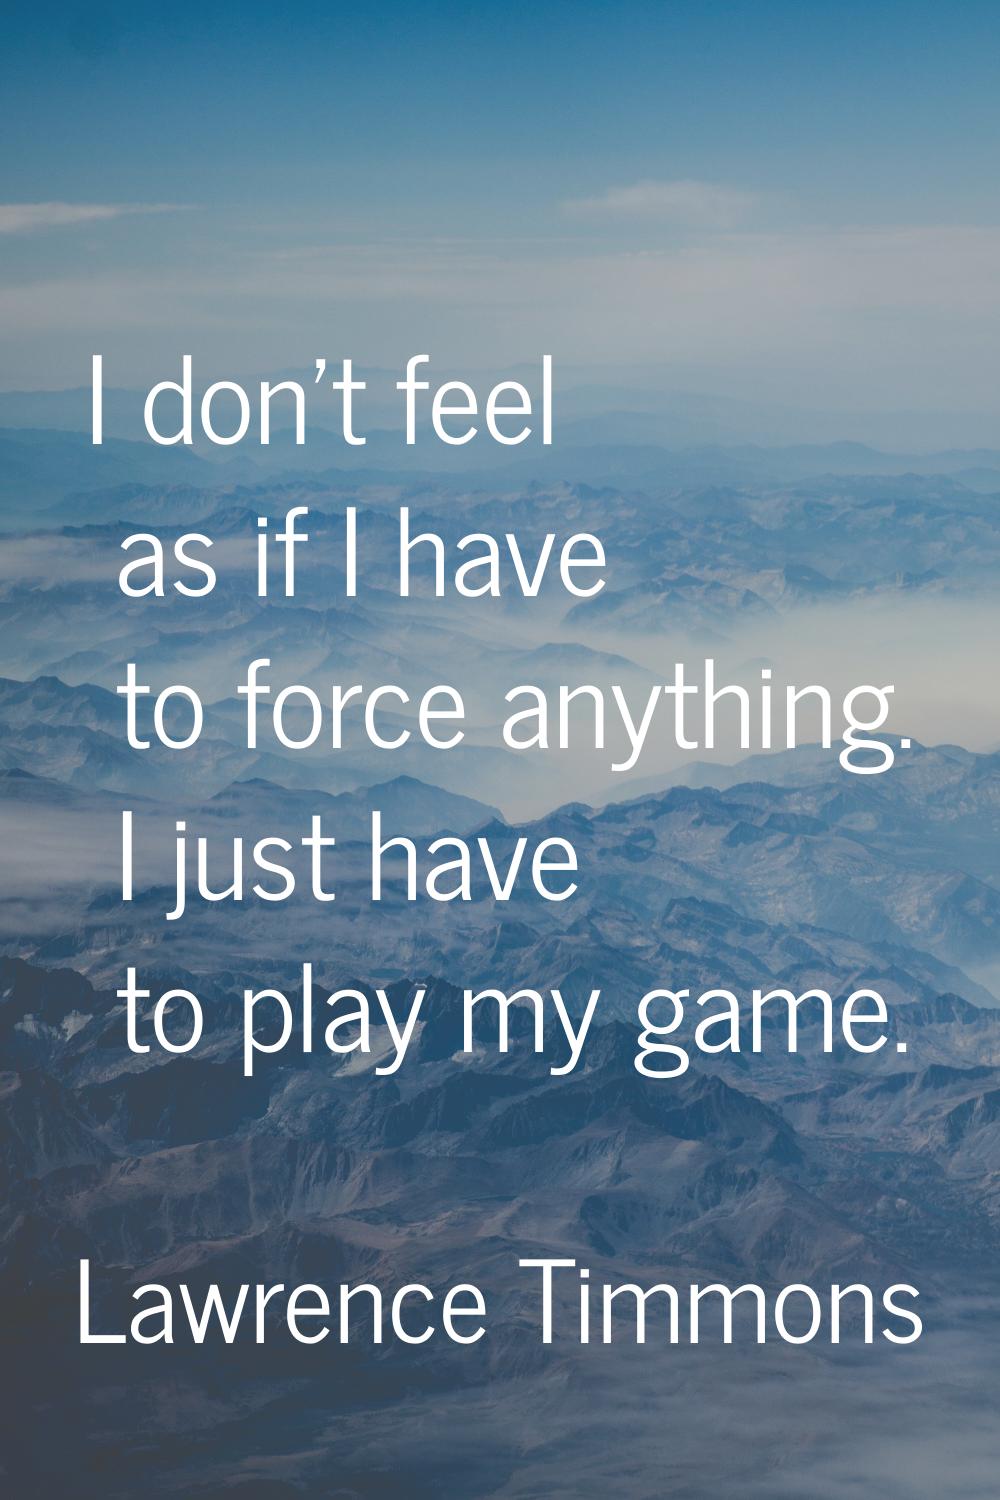 I don't feel as if I have to force anything. I just have to play my game.